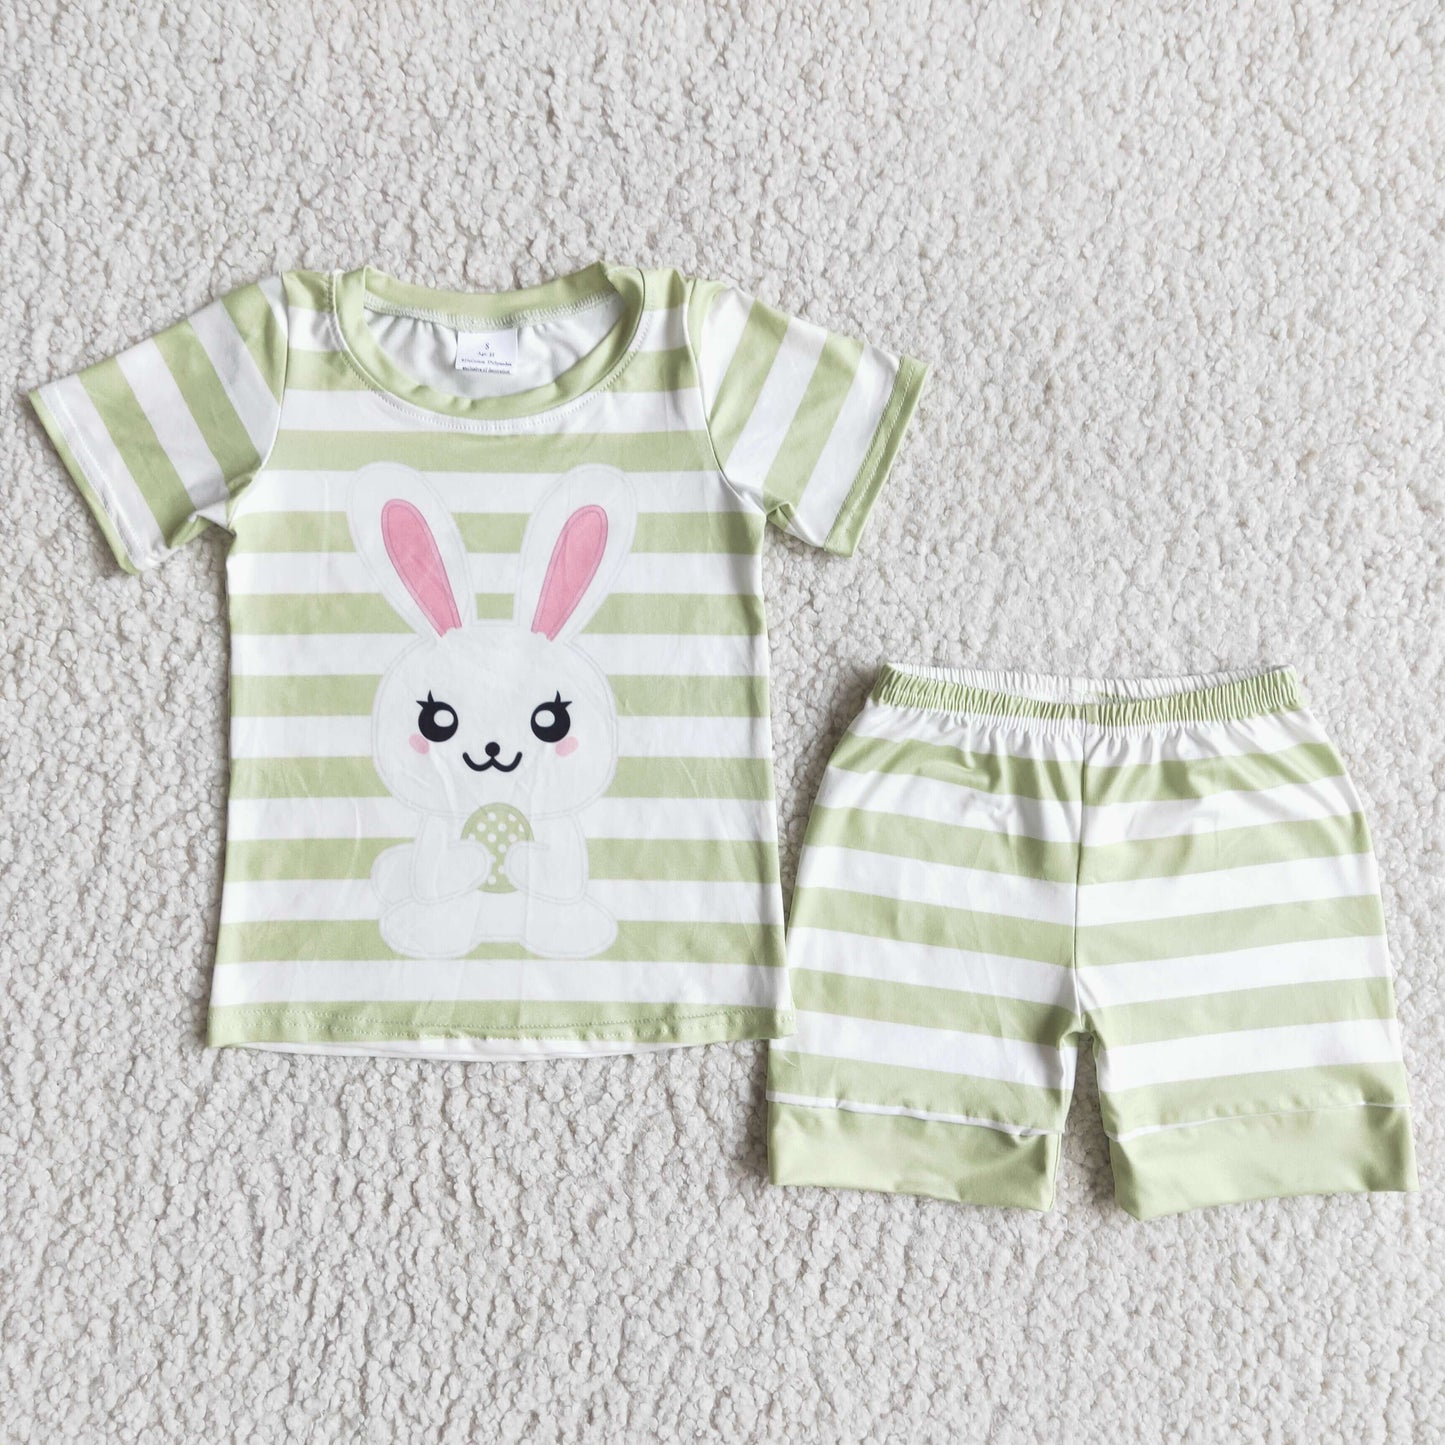 boy's outfit shorts set for easter